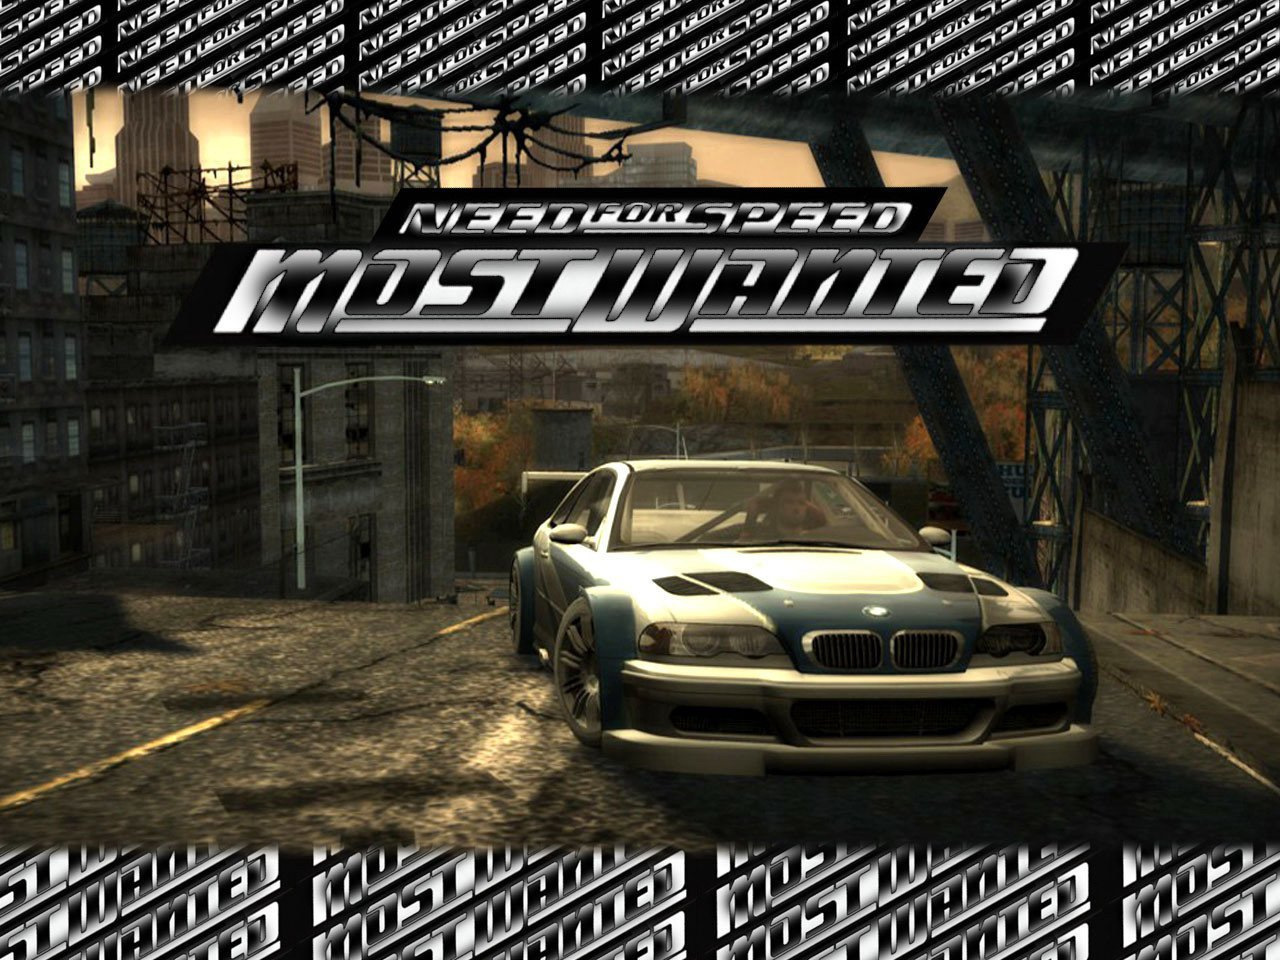 Песни из игры мост вантед. Гонки NFS most wanted. Need for Speed most wanted 2 часть. Из need for Speed most wanted 2005. Need for Speed most wanted Полицейская версия PC 2005.